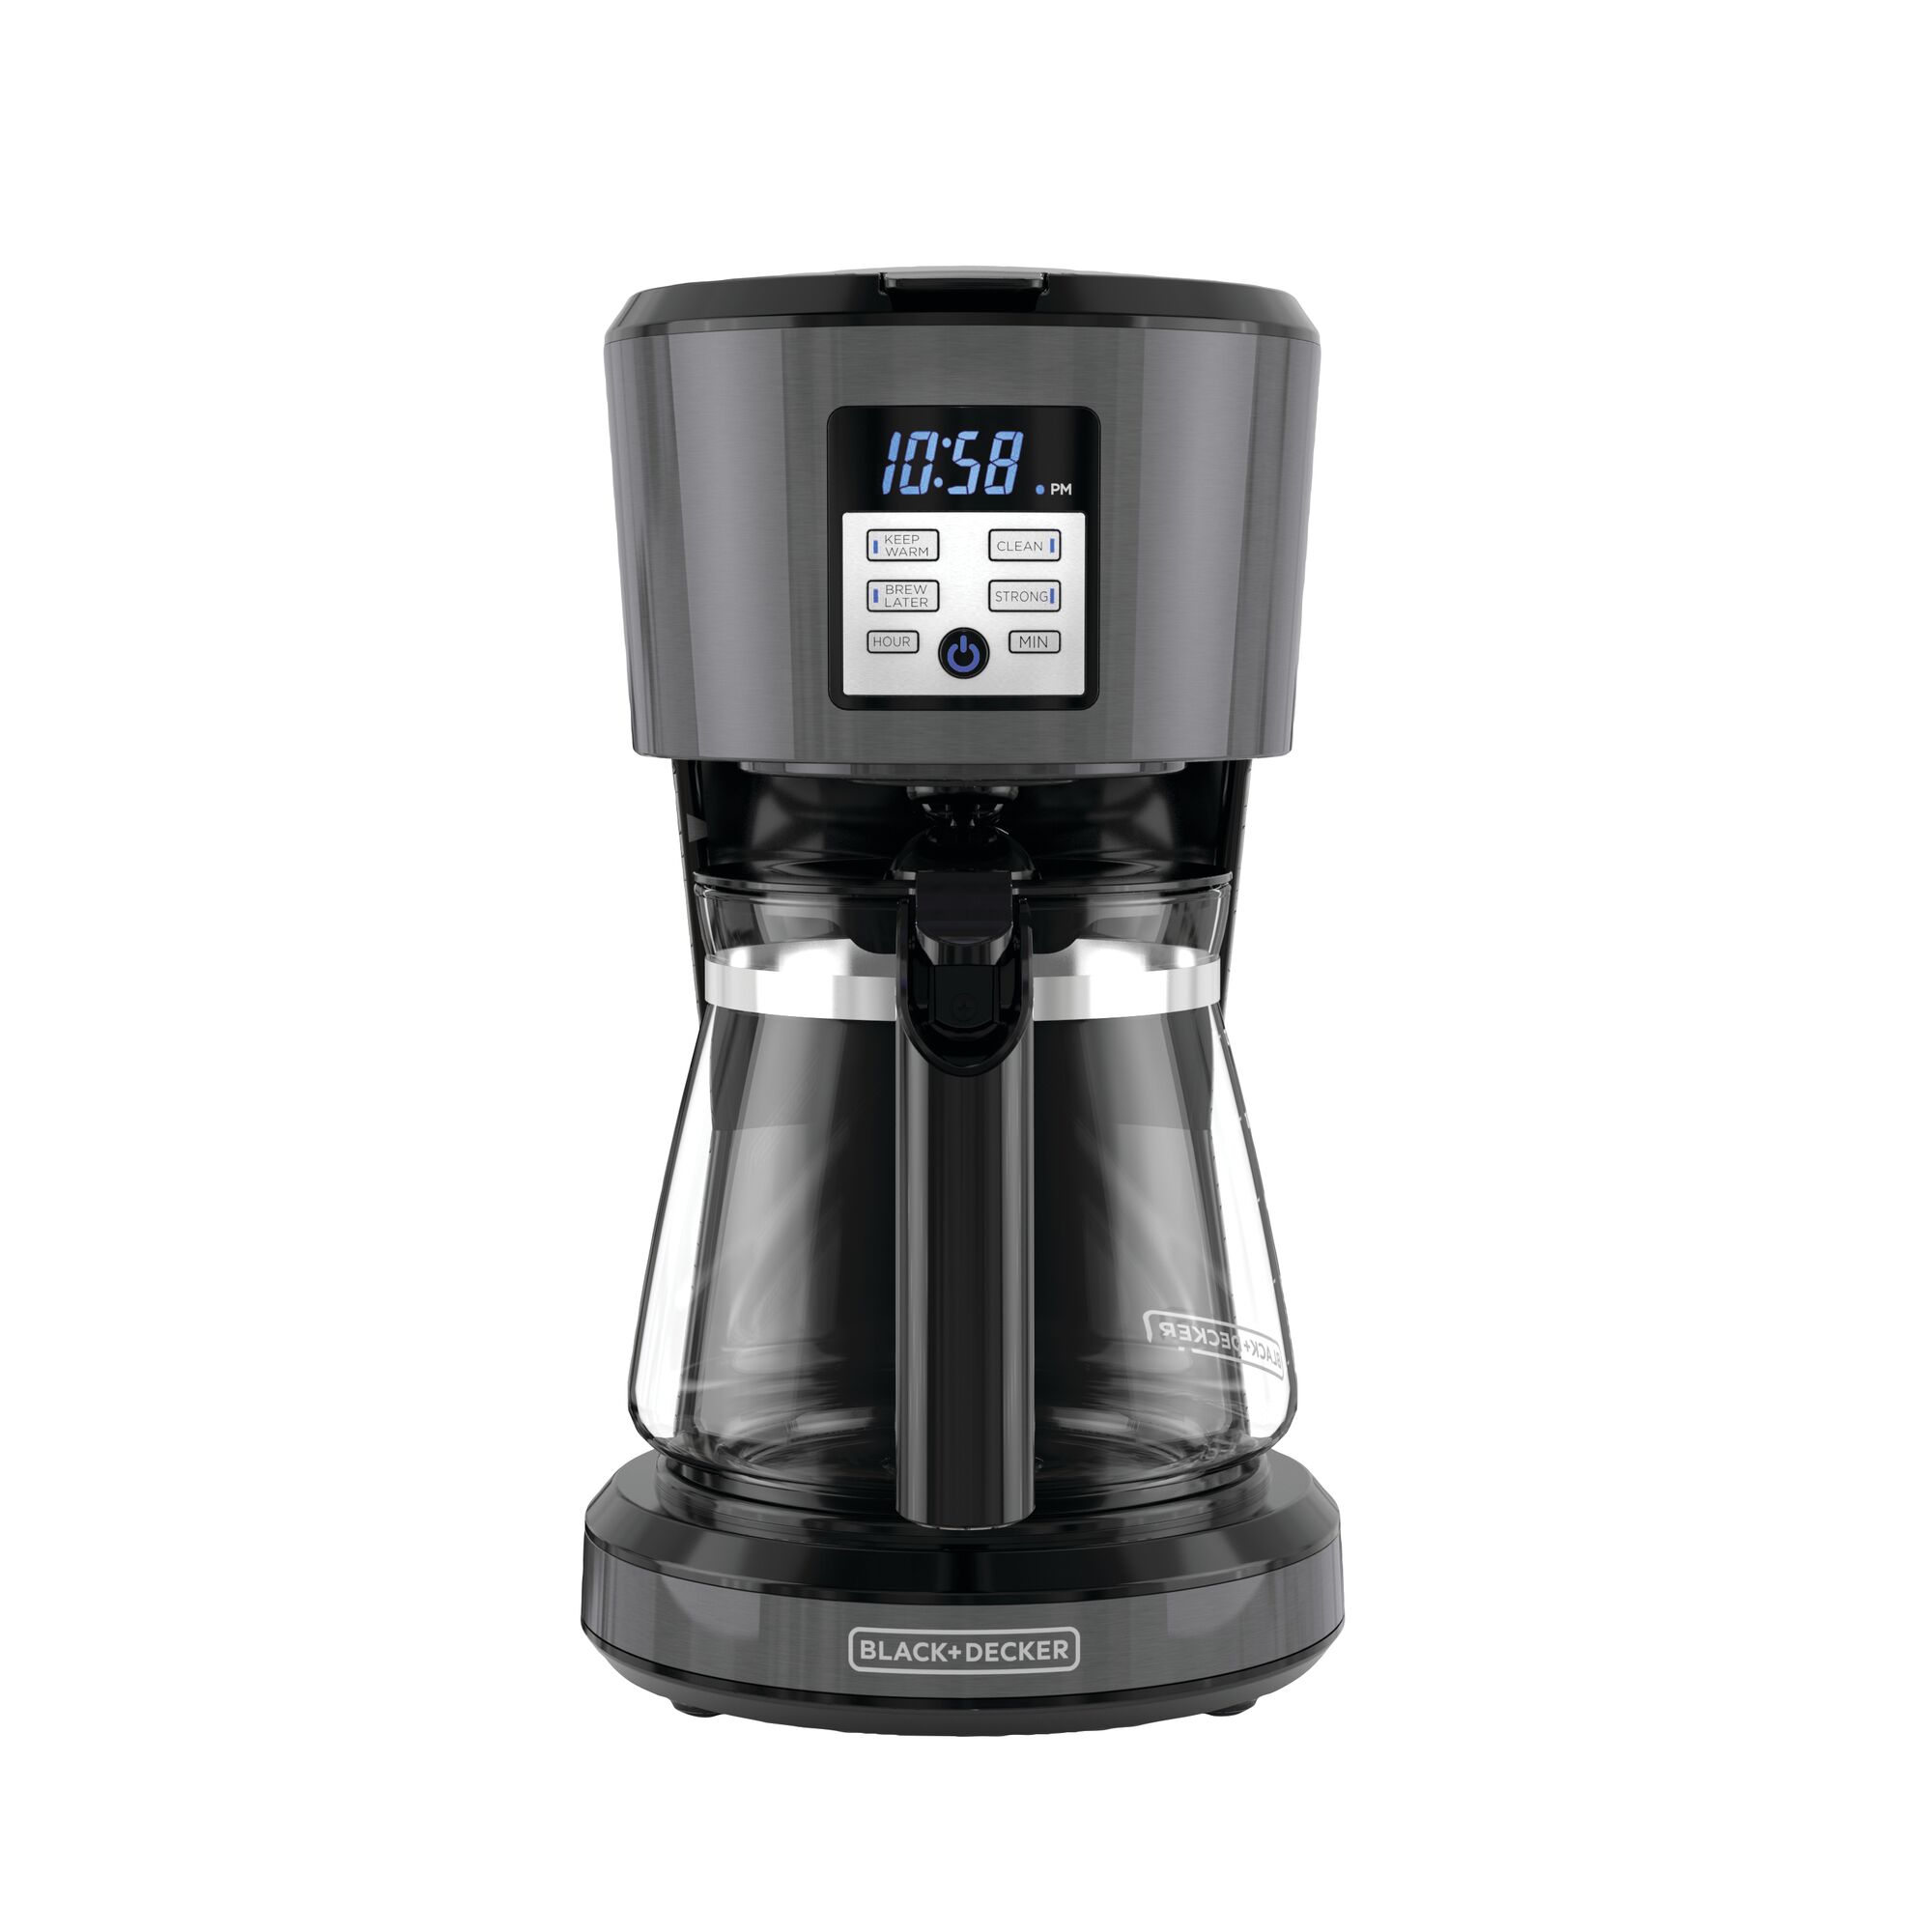 Forward view of the BLACK+DECKER 12 cup coffeemaker